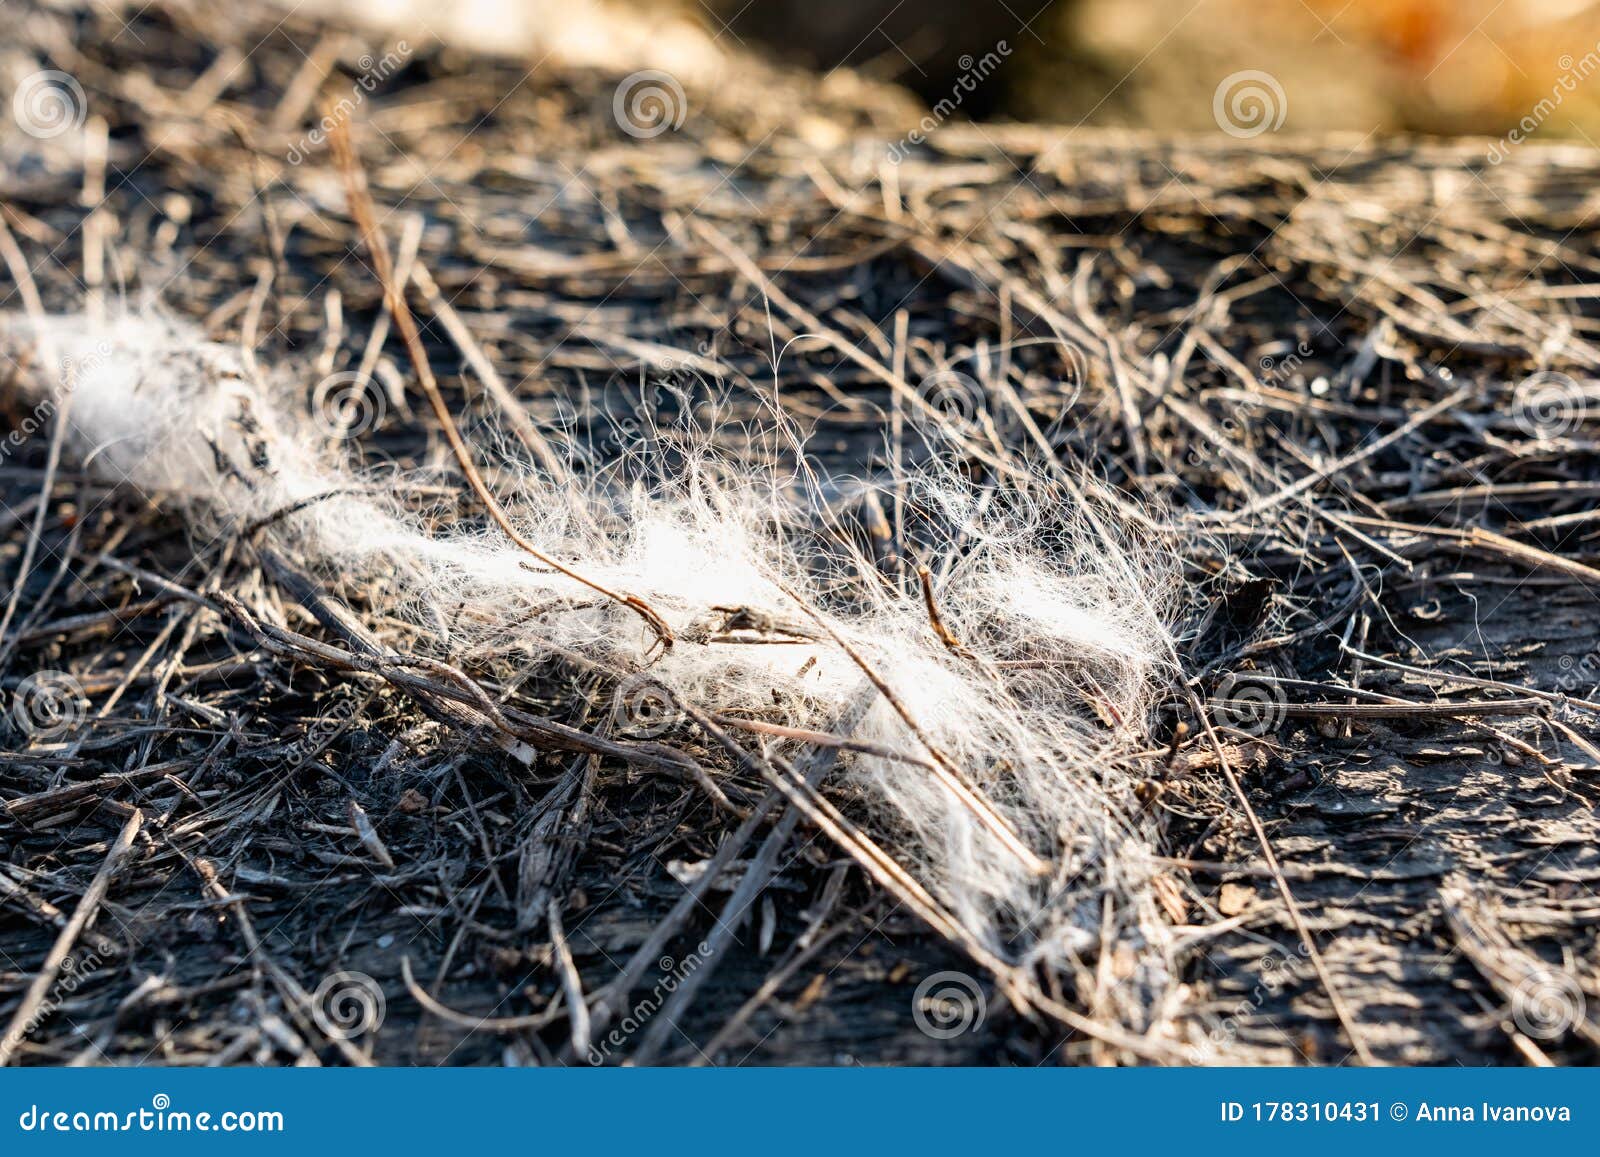 Light Gray Fibers from Animal Hair or White Down, Caught on Small Wooden  Debris on the Street Stock Image - Image of pile, outdoor: 178310431